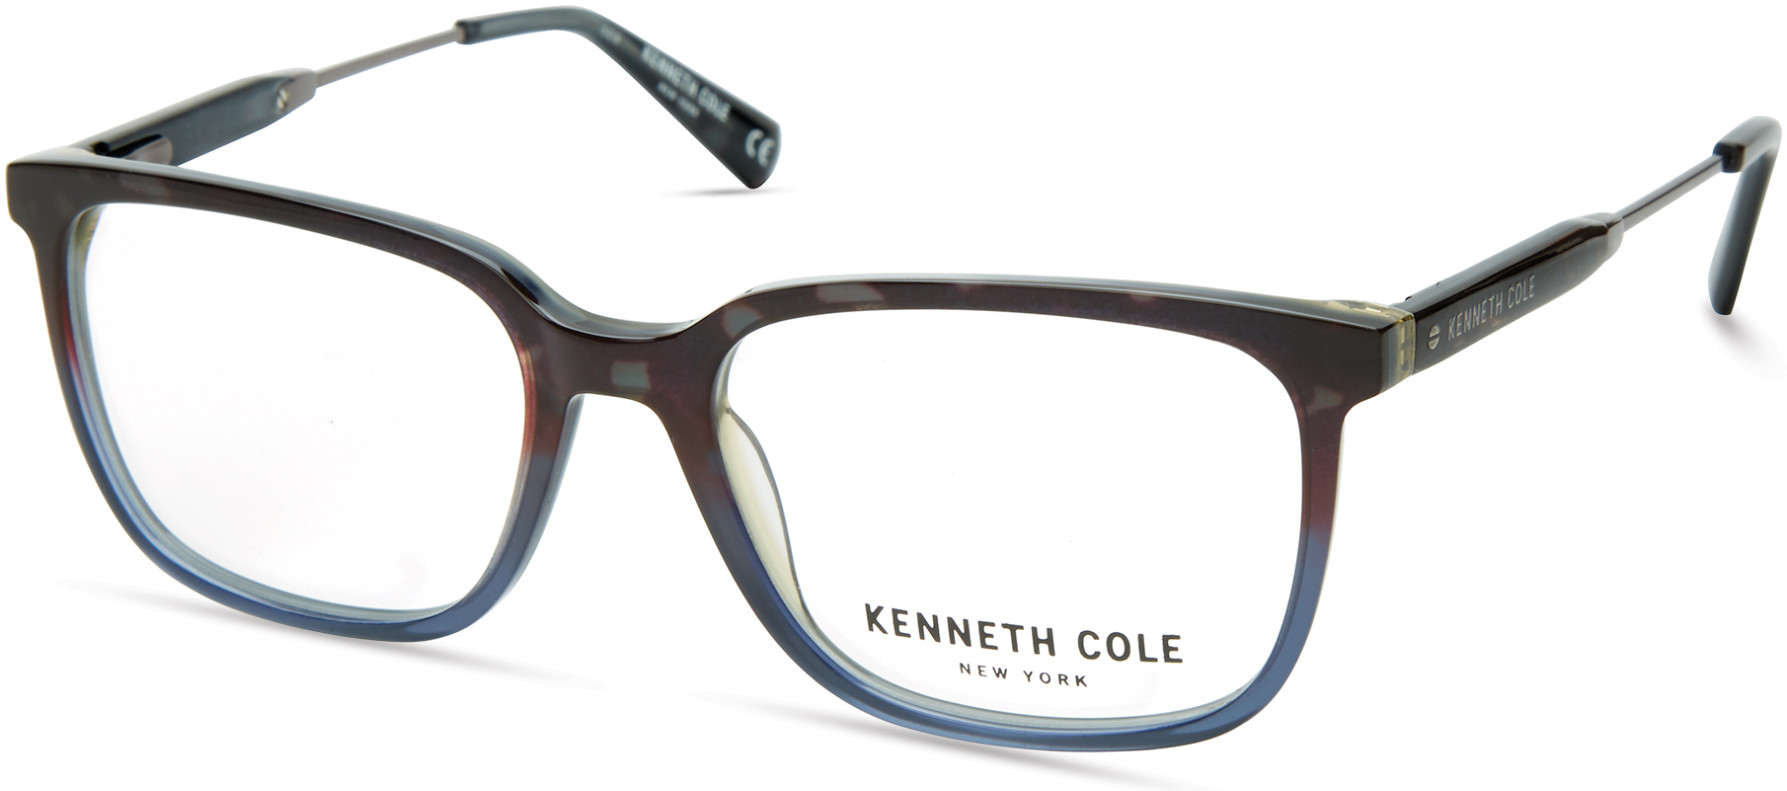 KENNETH COLE NY 0304 056